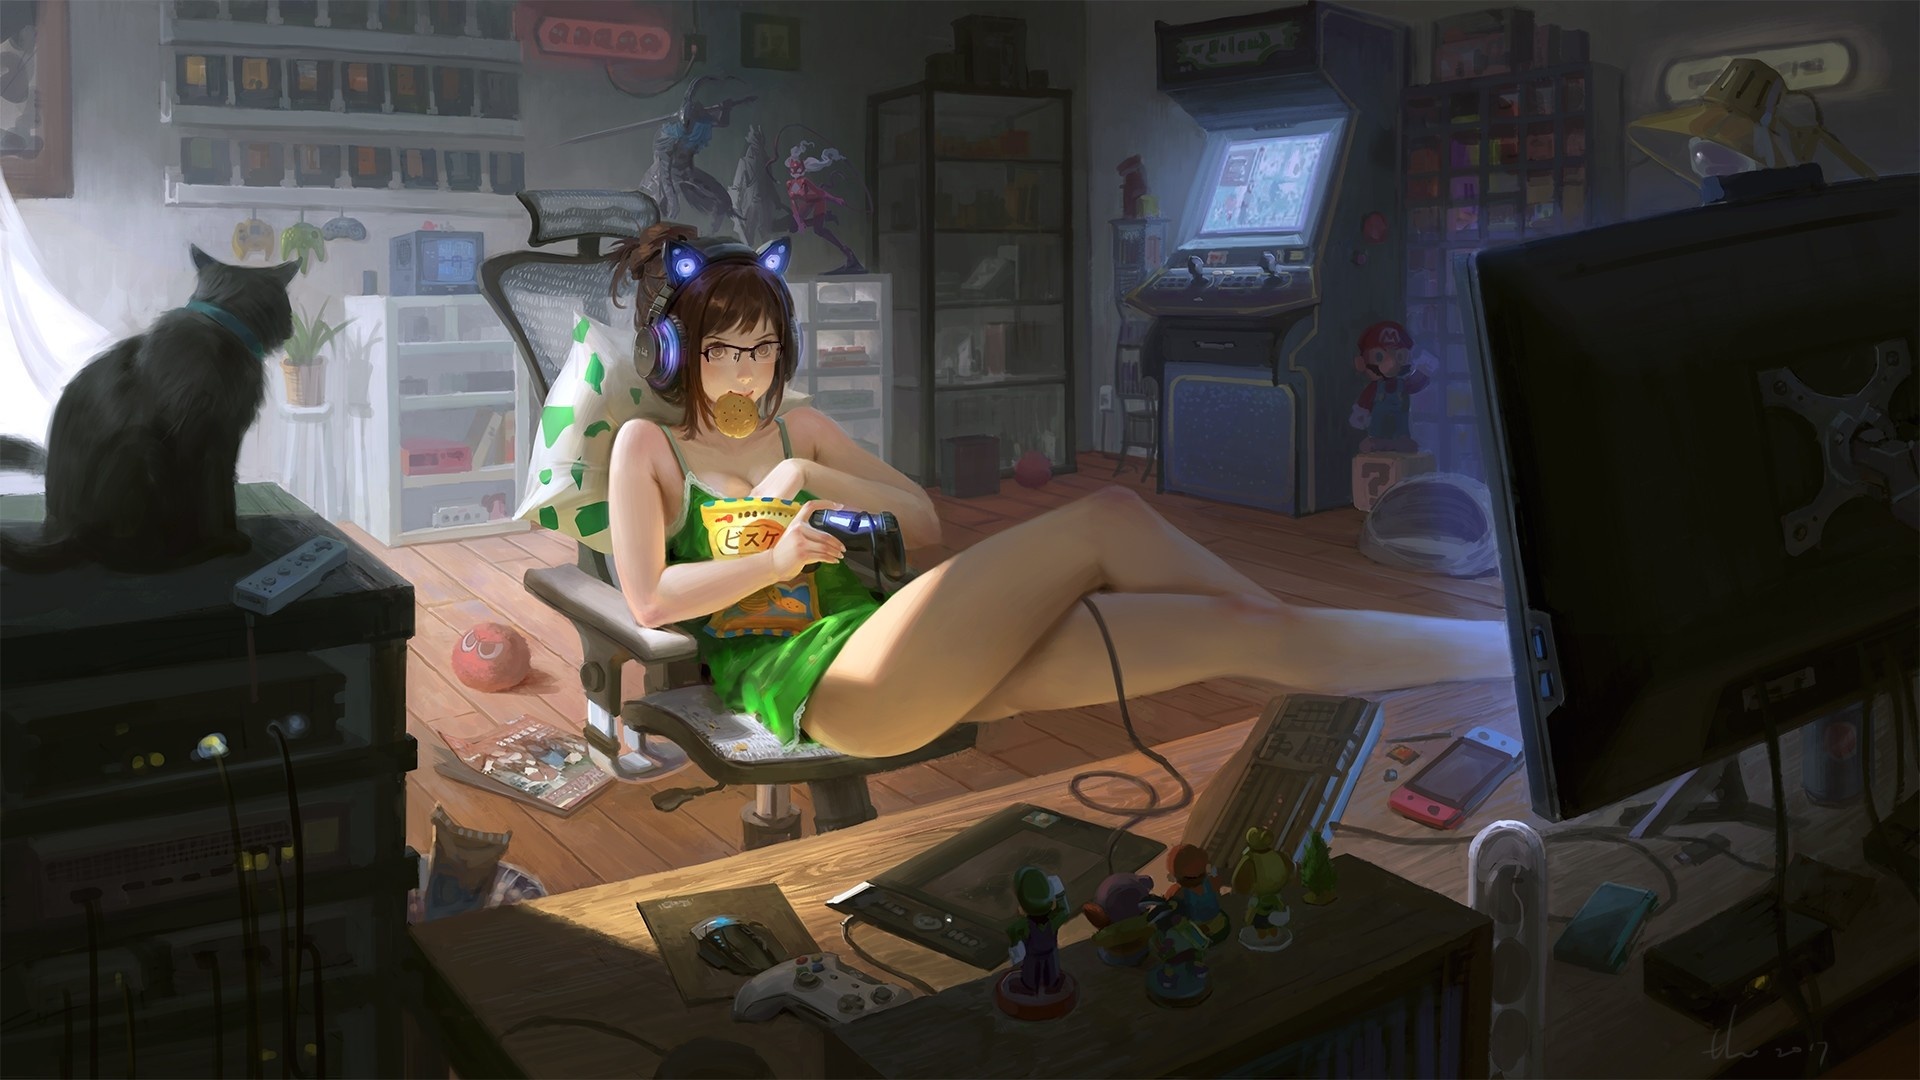 Gamer Girl, A collection, Gaming wallpapers, Captivating visuals, 1920x1080 Full HD Desktop